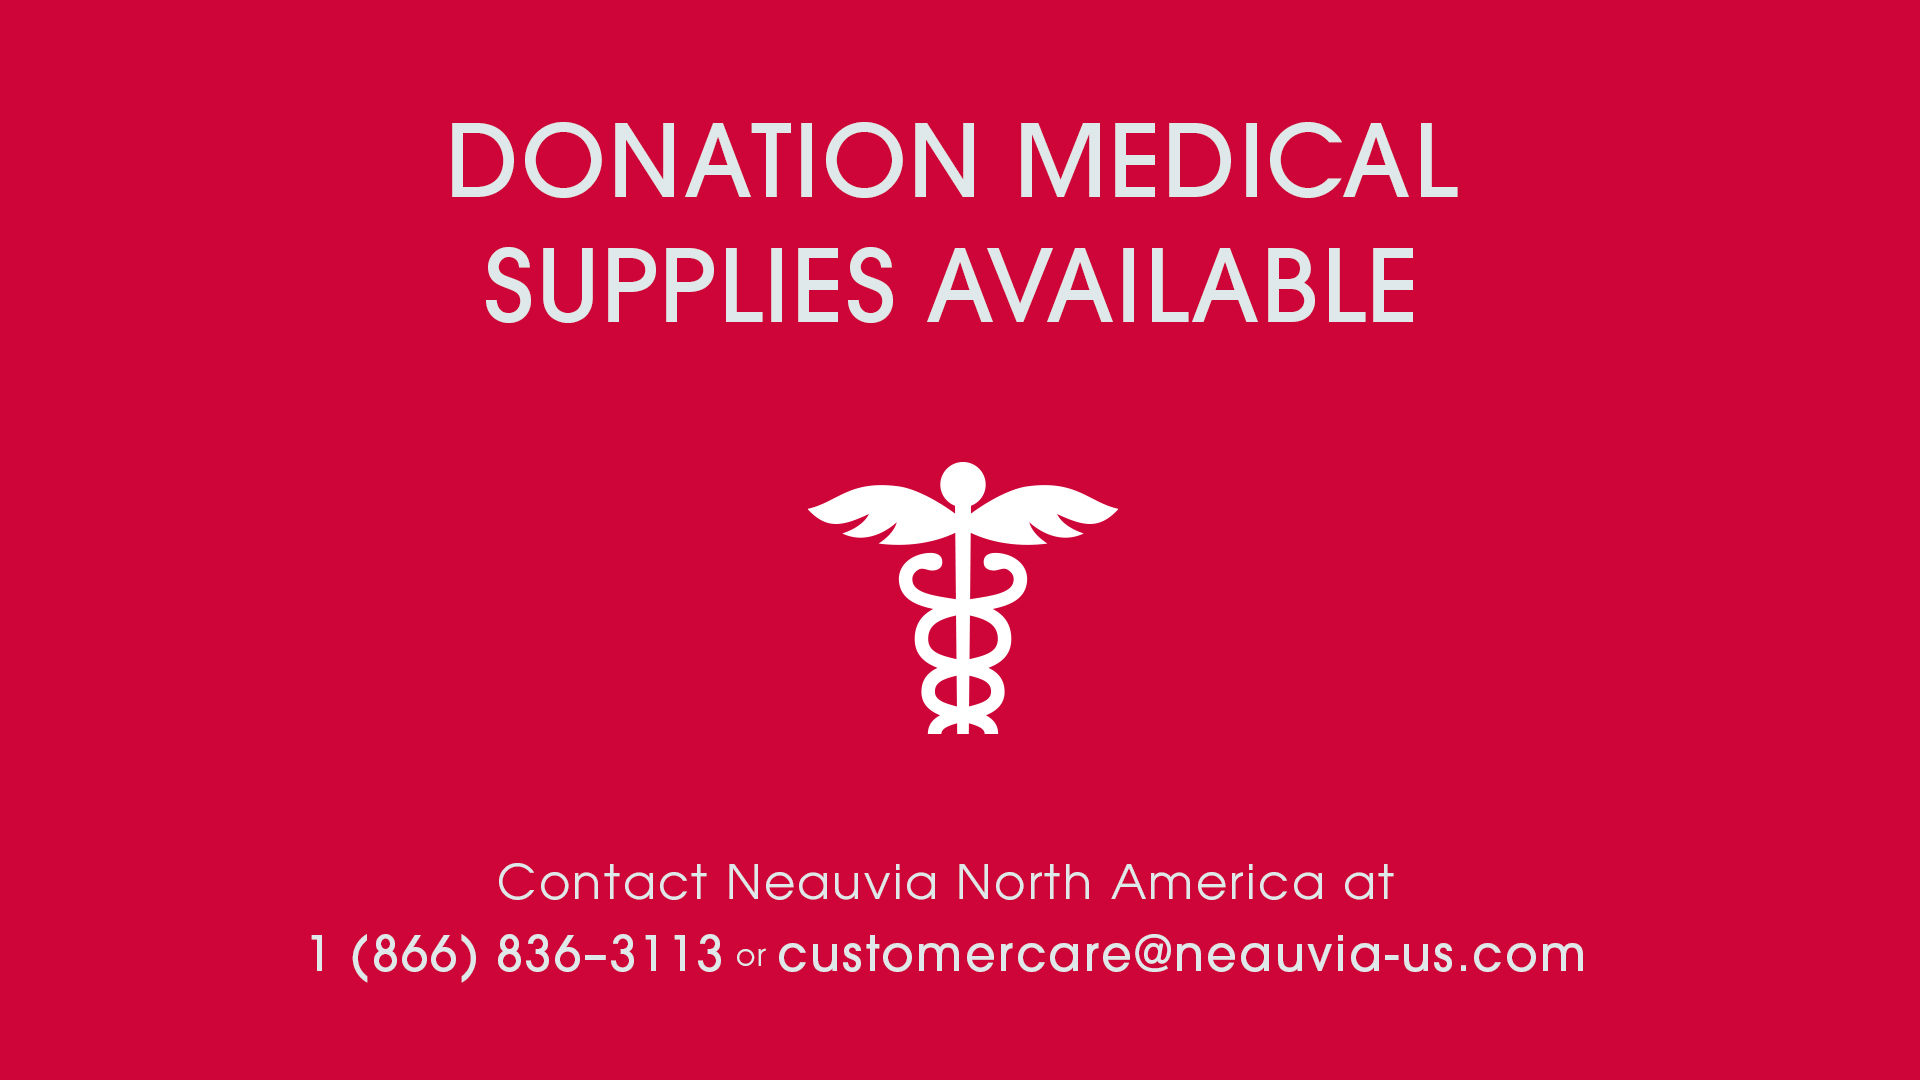 Donation Medical Supplies Available from Neauvia North America